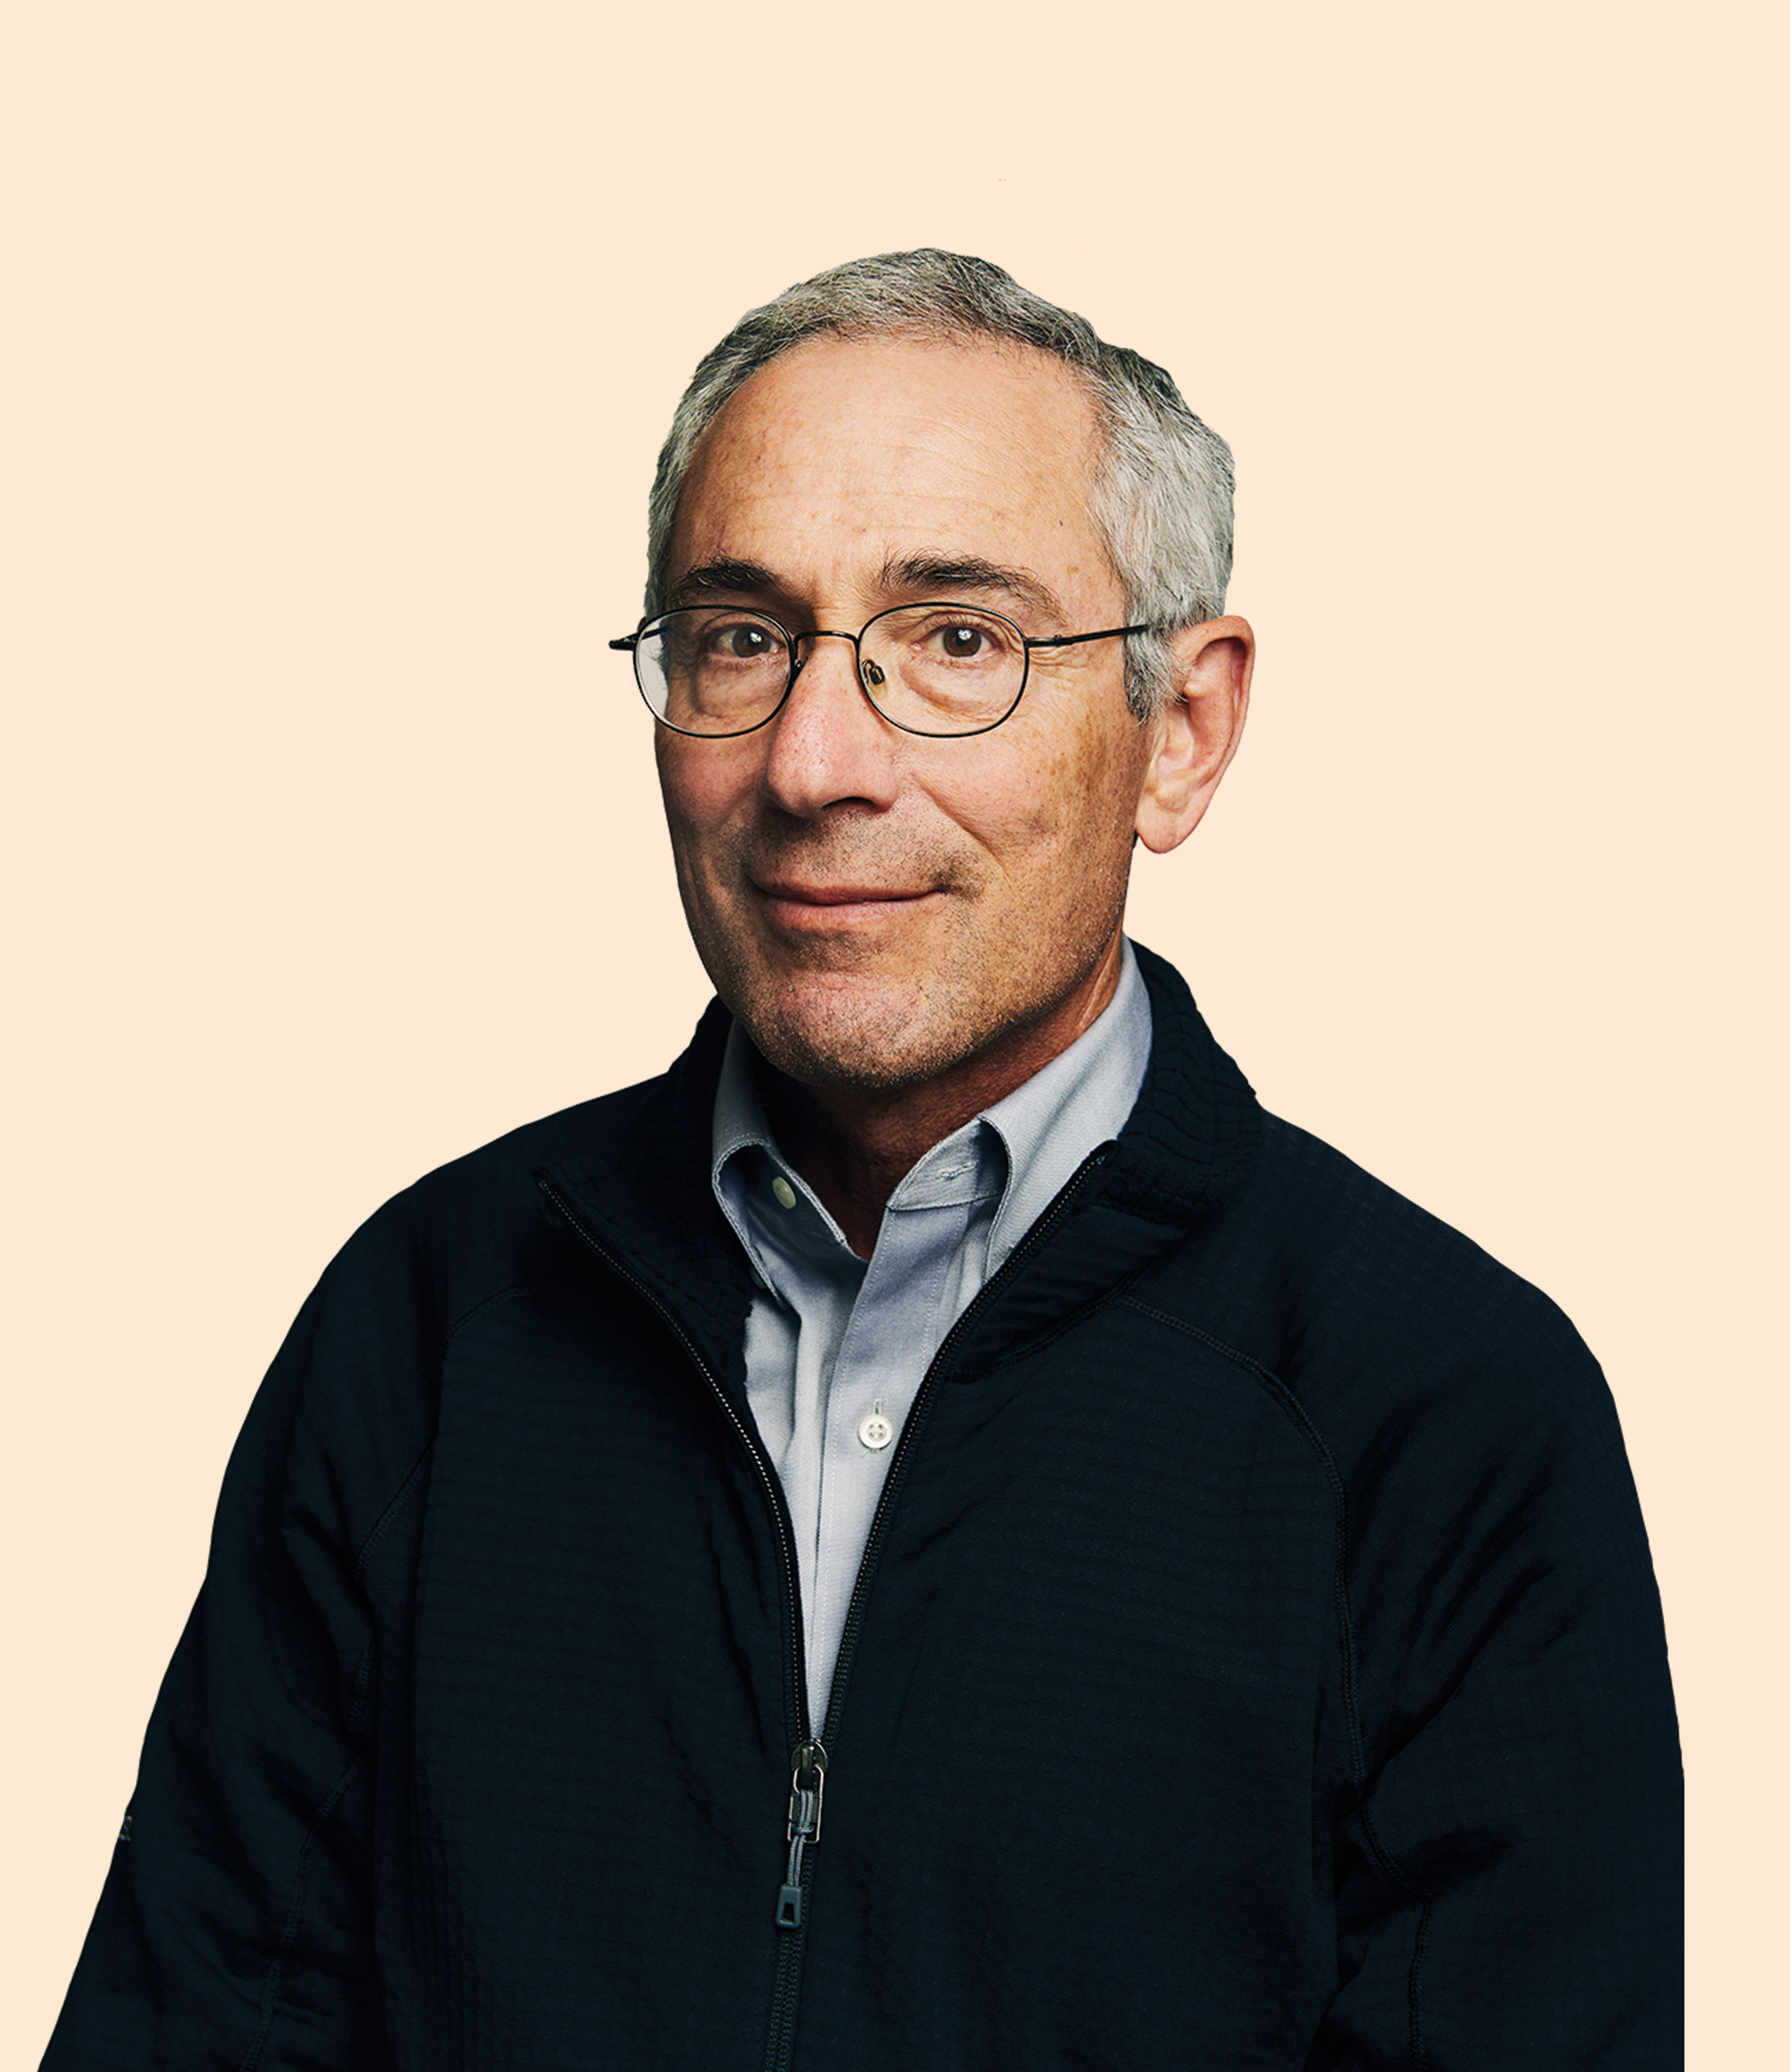 Cofounder Tom Insel, a psychiatrist and former director of the National Institute of Mental Health.